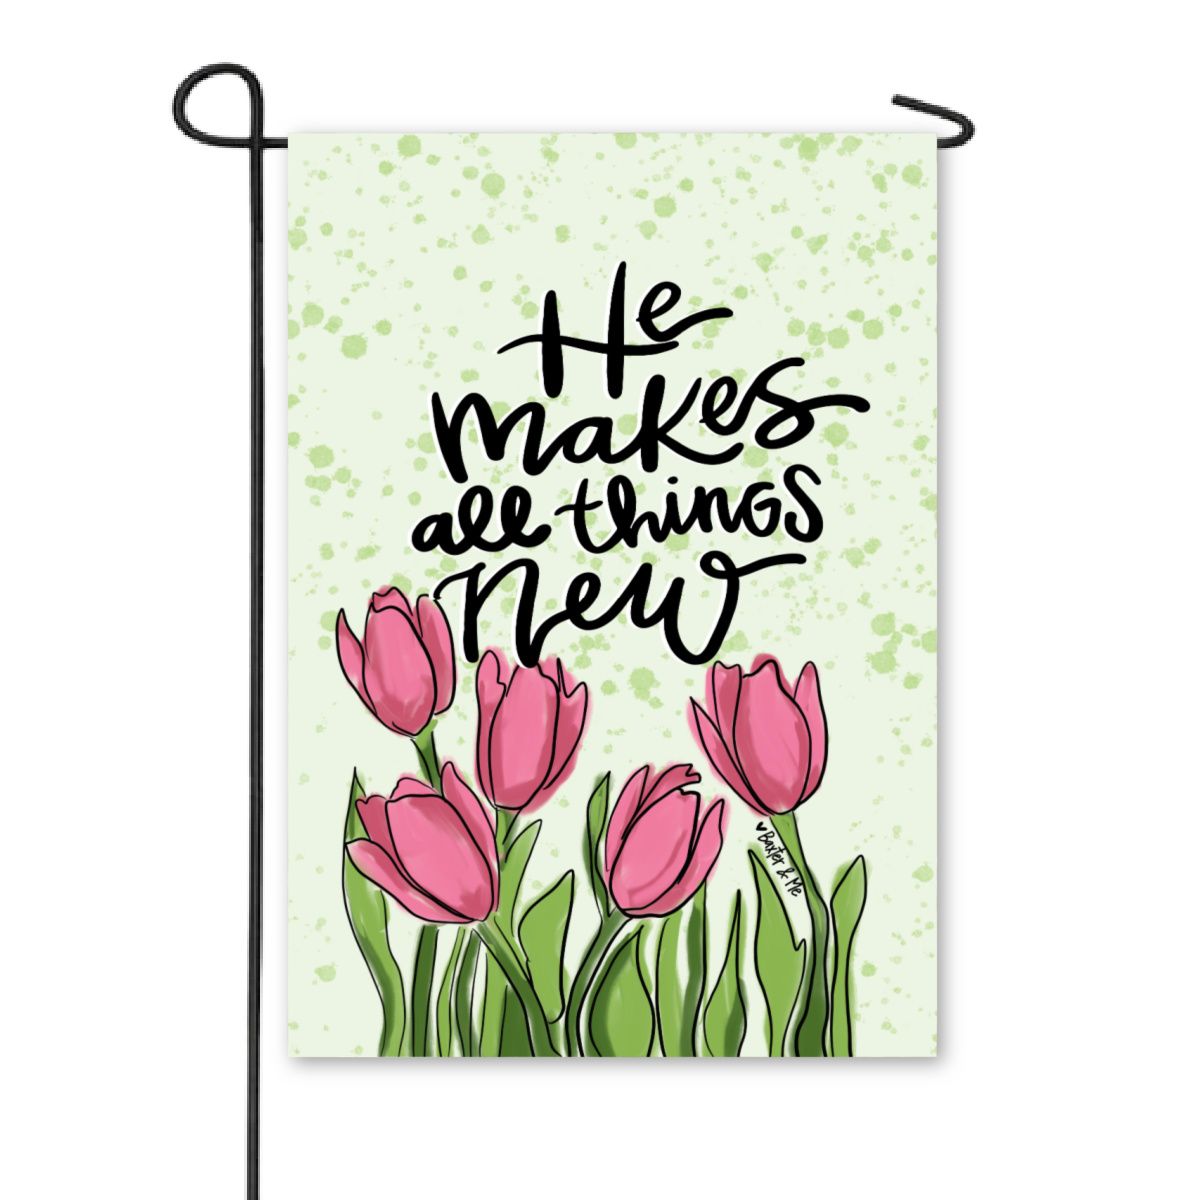 All Things New Tulips Garden Flag